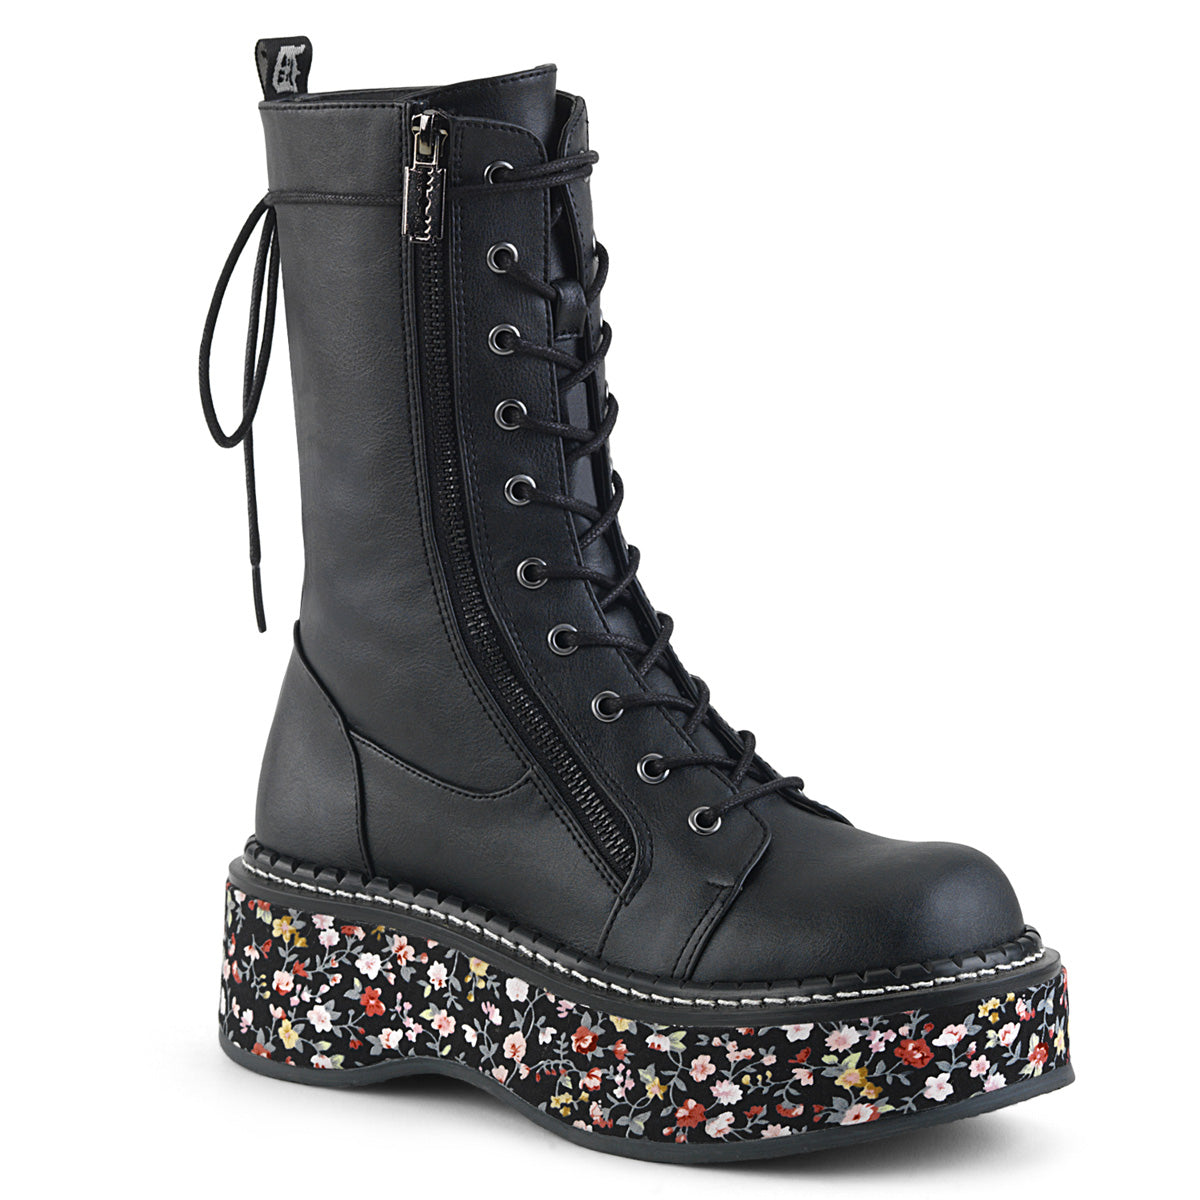 EMILY-350 Black Floral Fabric Boots